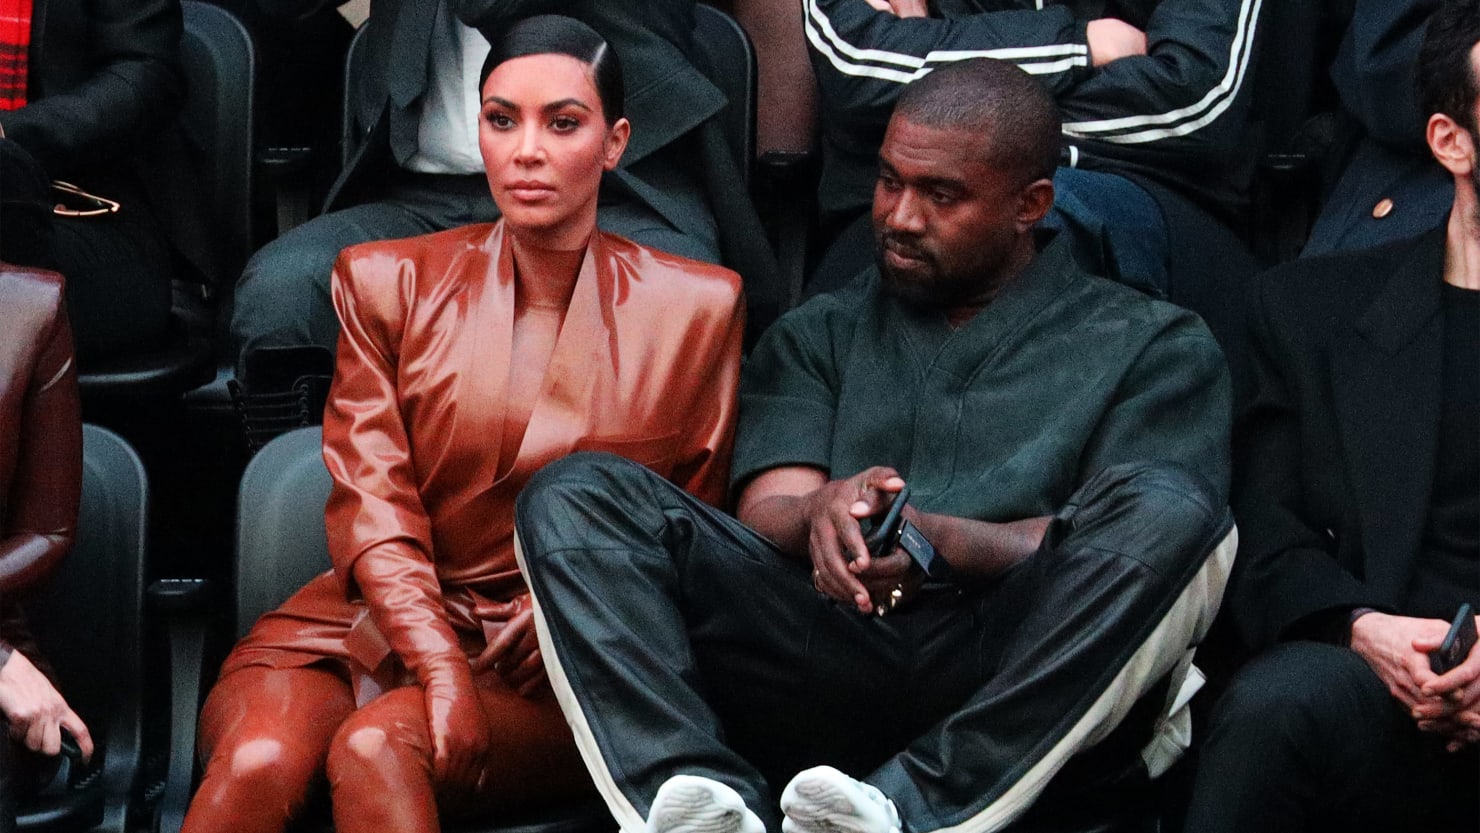 The curious time of Kim Kardashian’s divorce from Kanye West